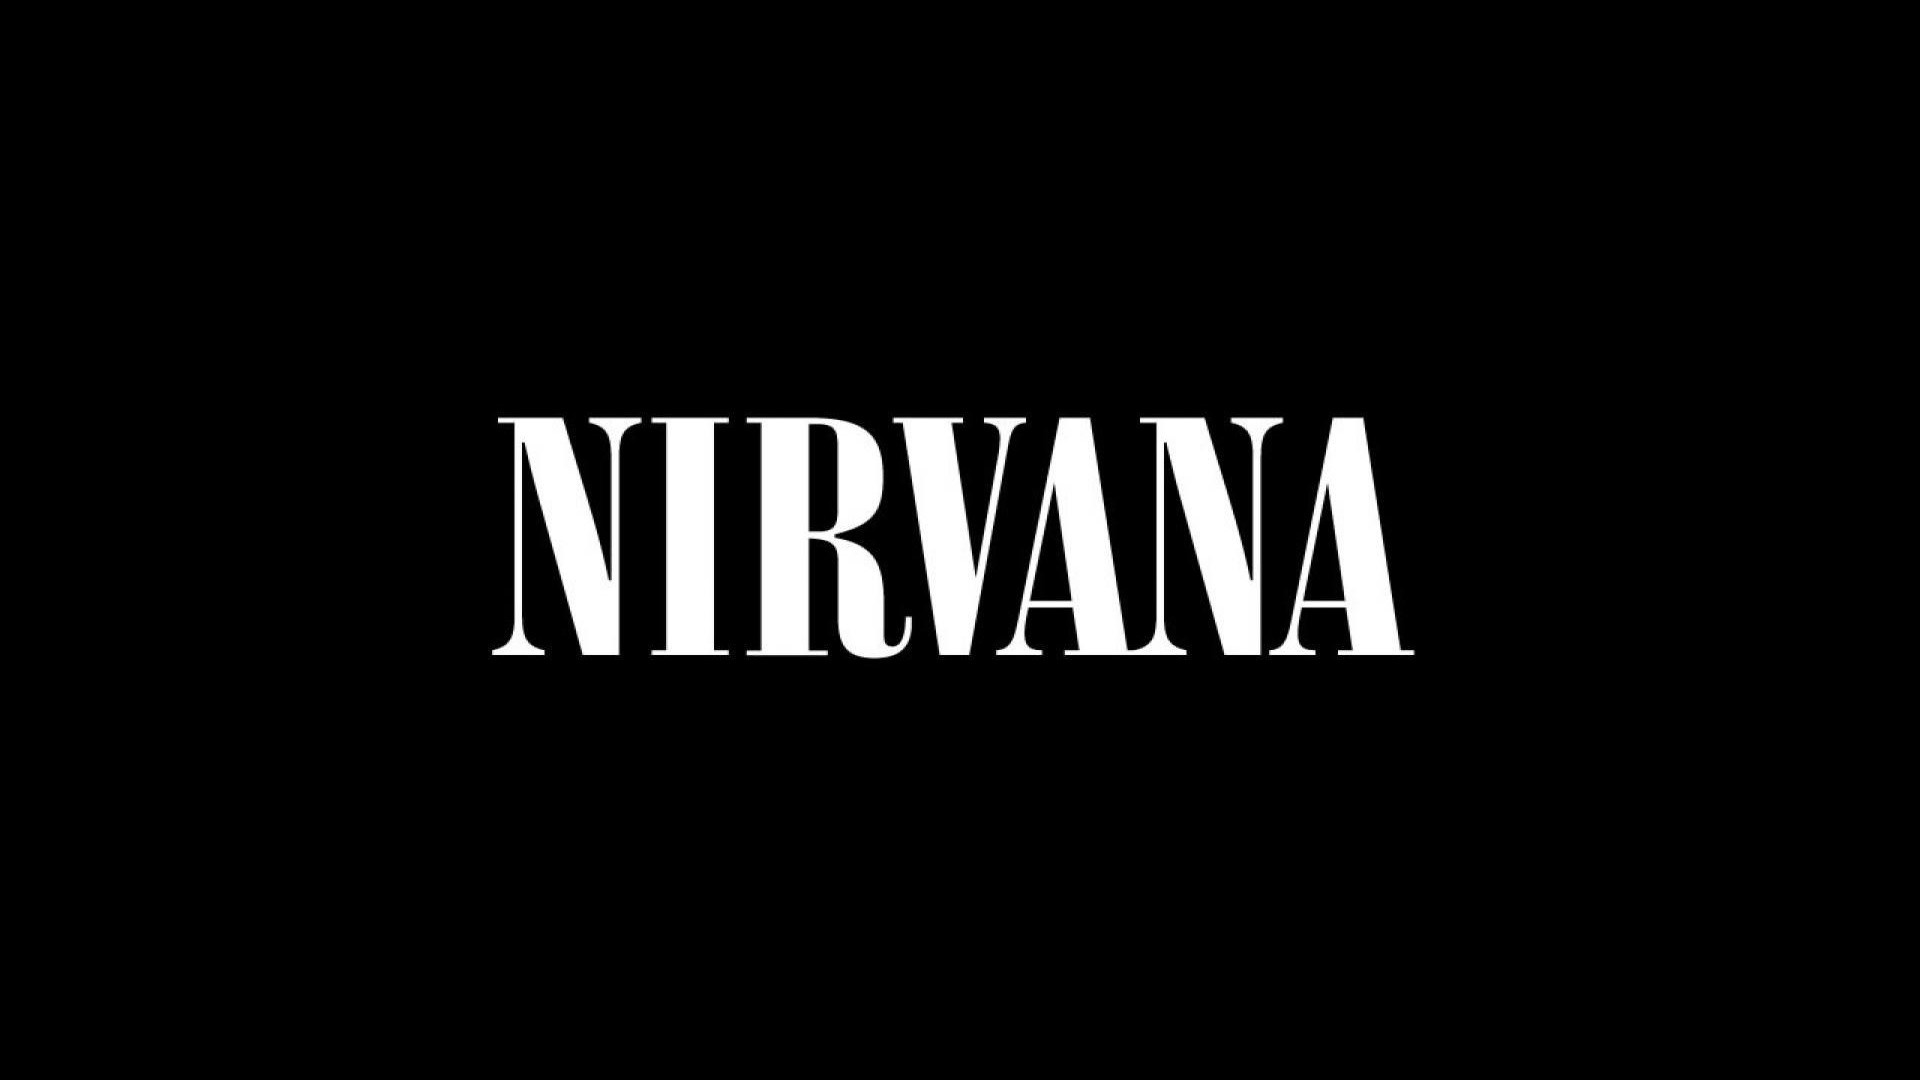 Nirvana logo and the history of the band